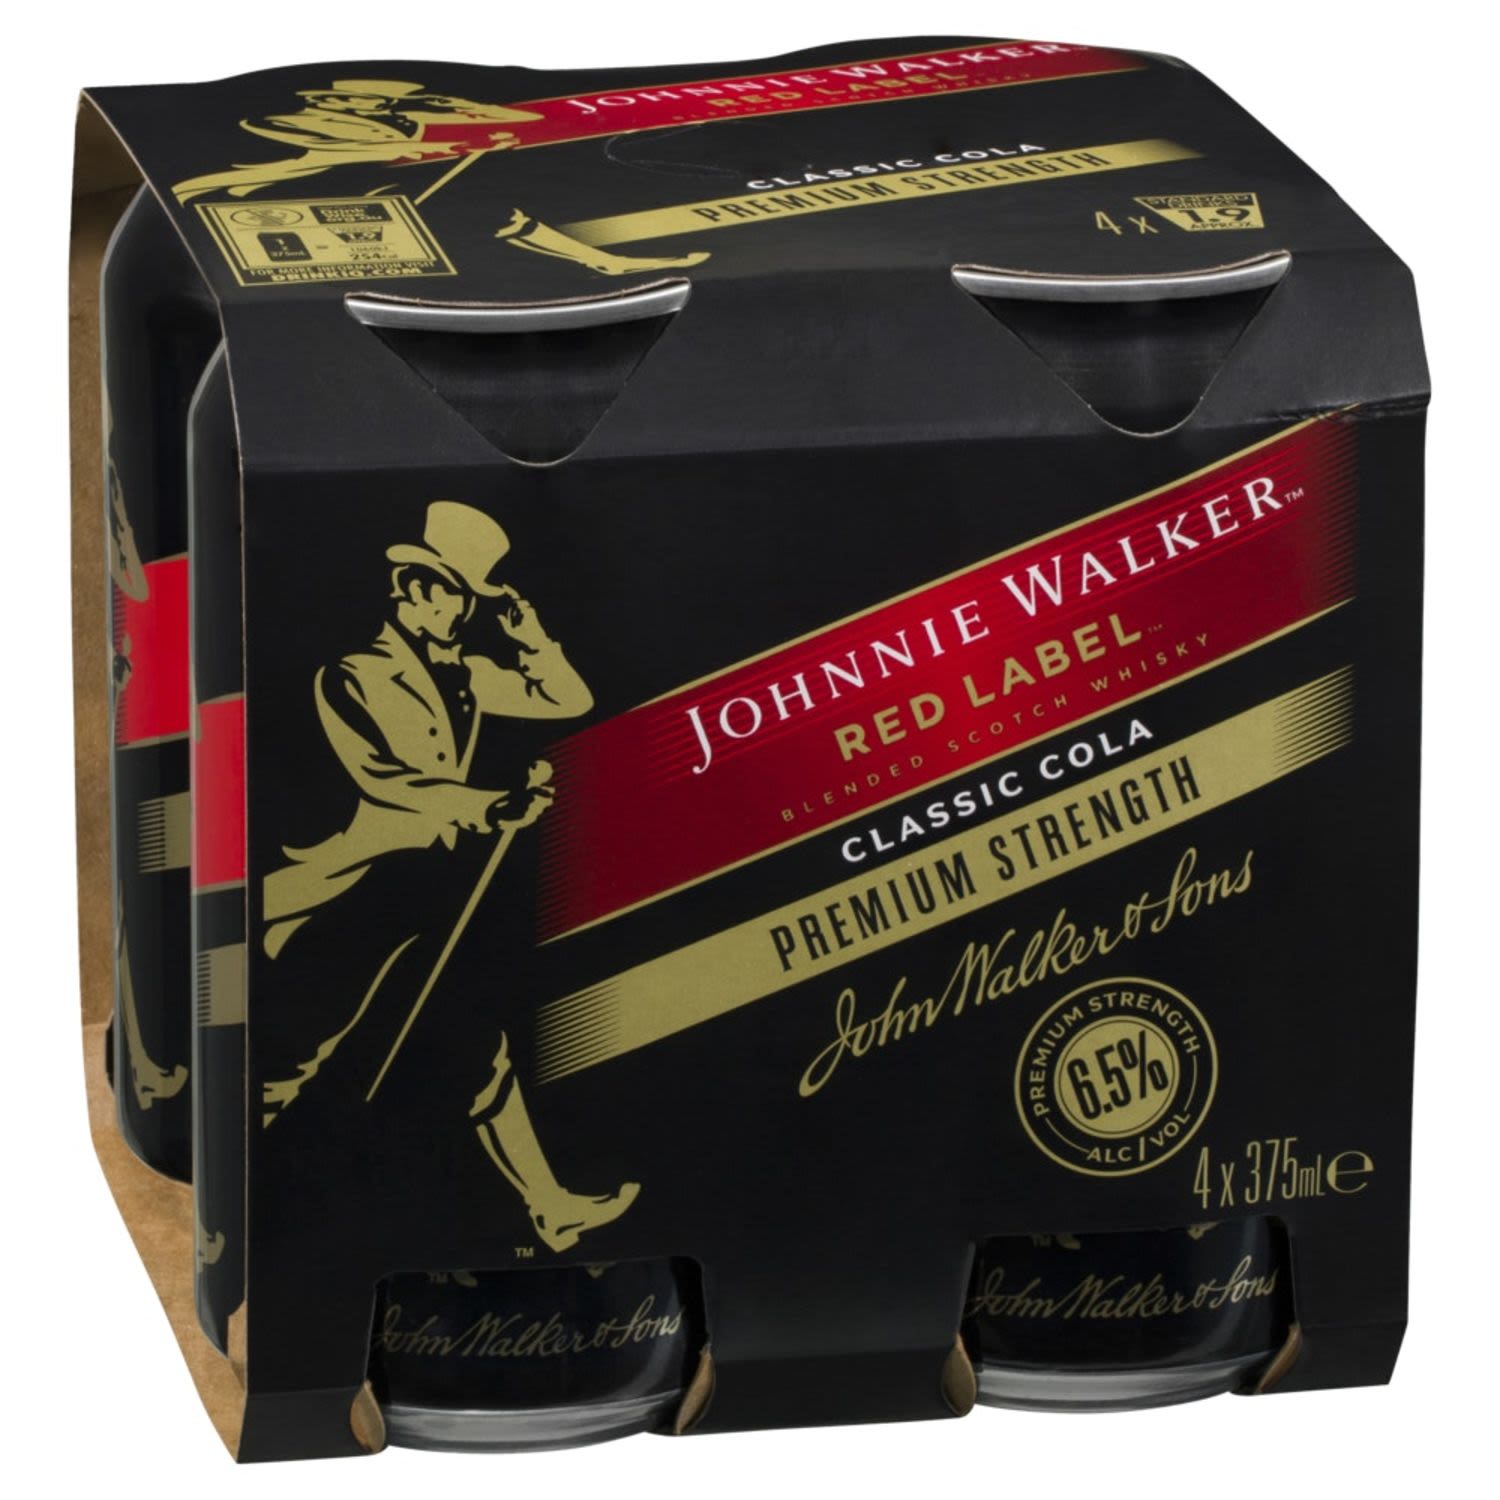 Johnnie Walker Red & Cola Premium Strength Can 6.5% 375mL 4 Pack